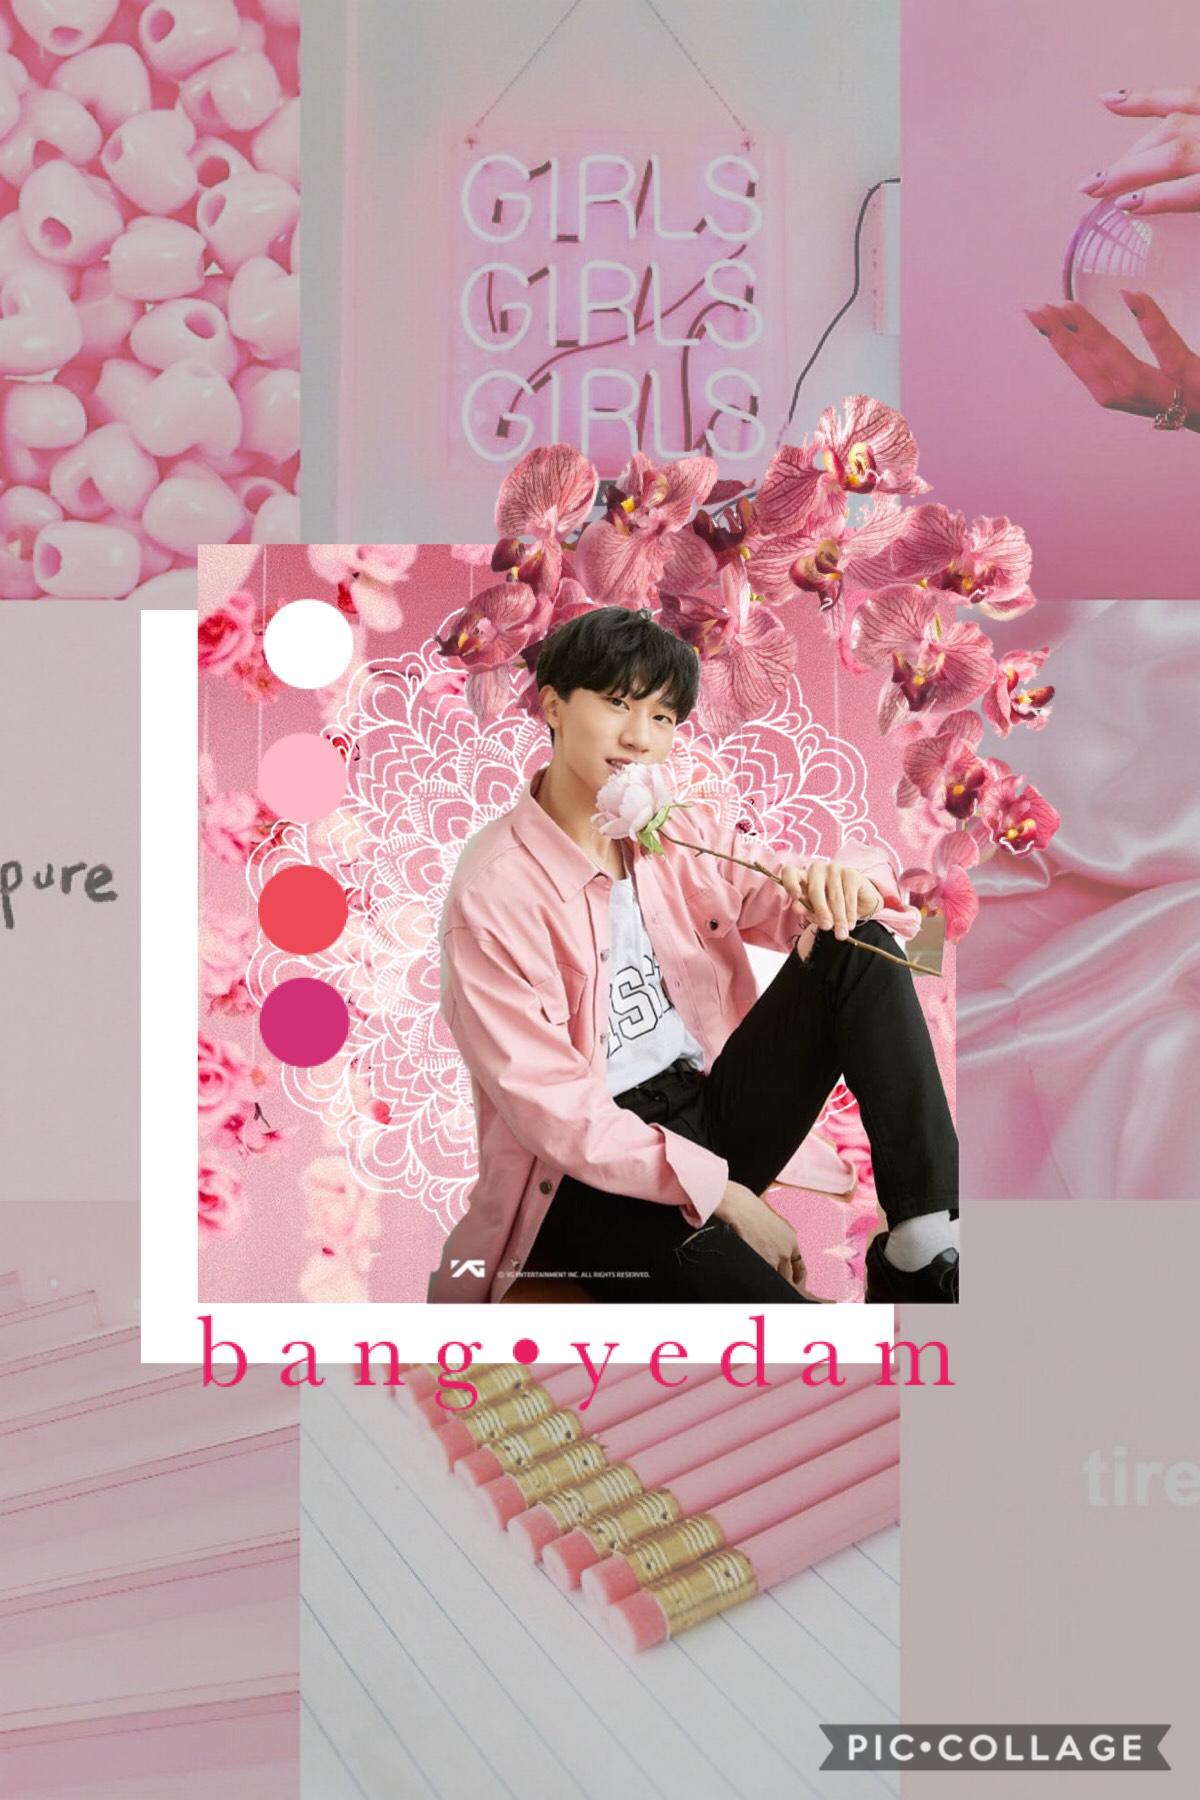 ☆*:.｡. TAP .｡.:*☆
This is a Yedam edit for the lovely @Whoop_Whoop127! I don’t really know Yedam that well but I tried my best! (о´∀`о)